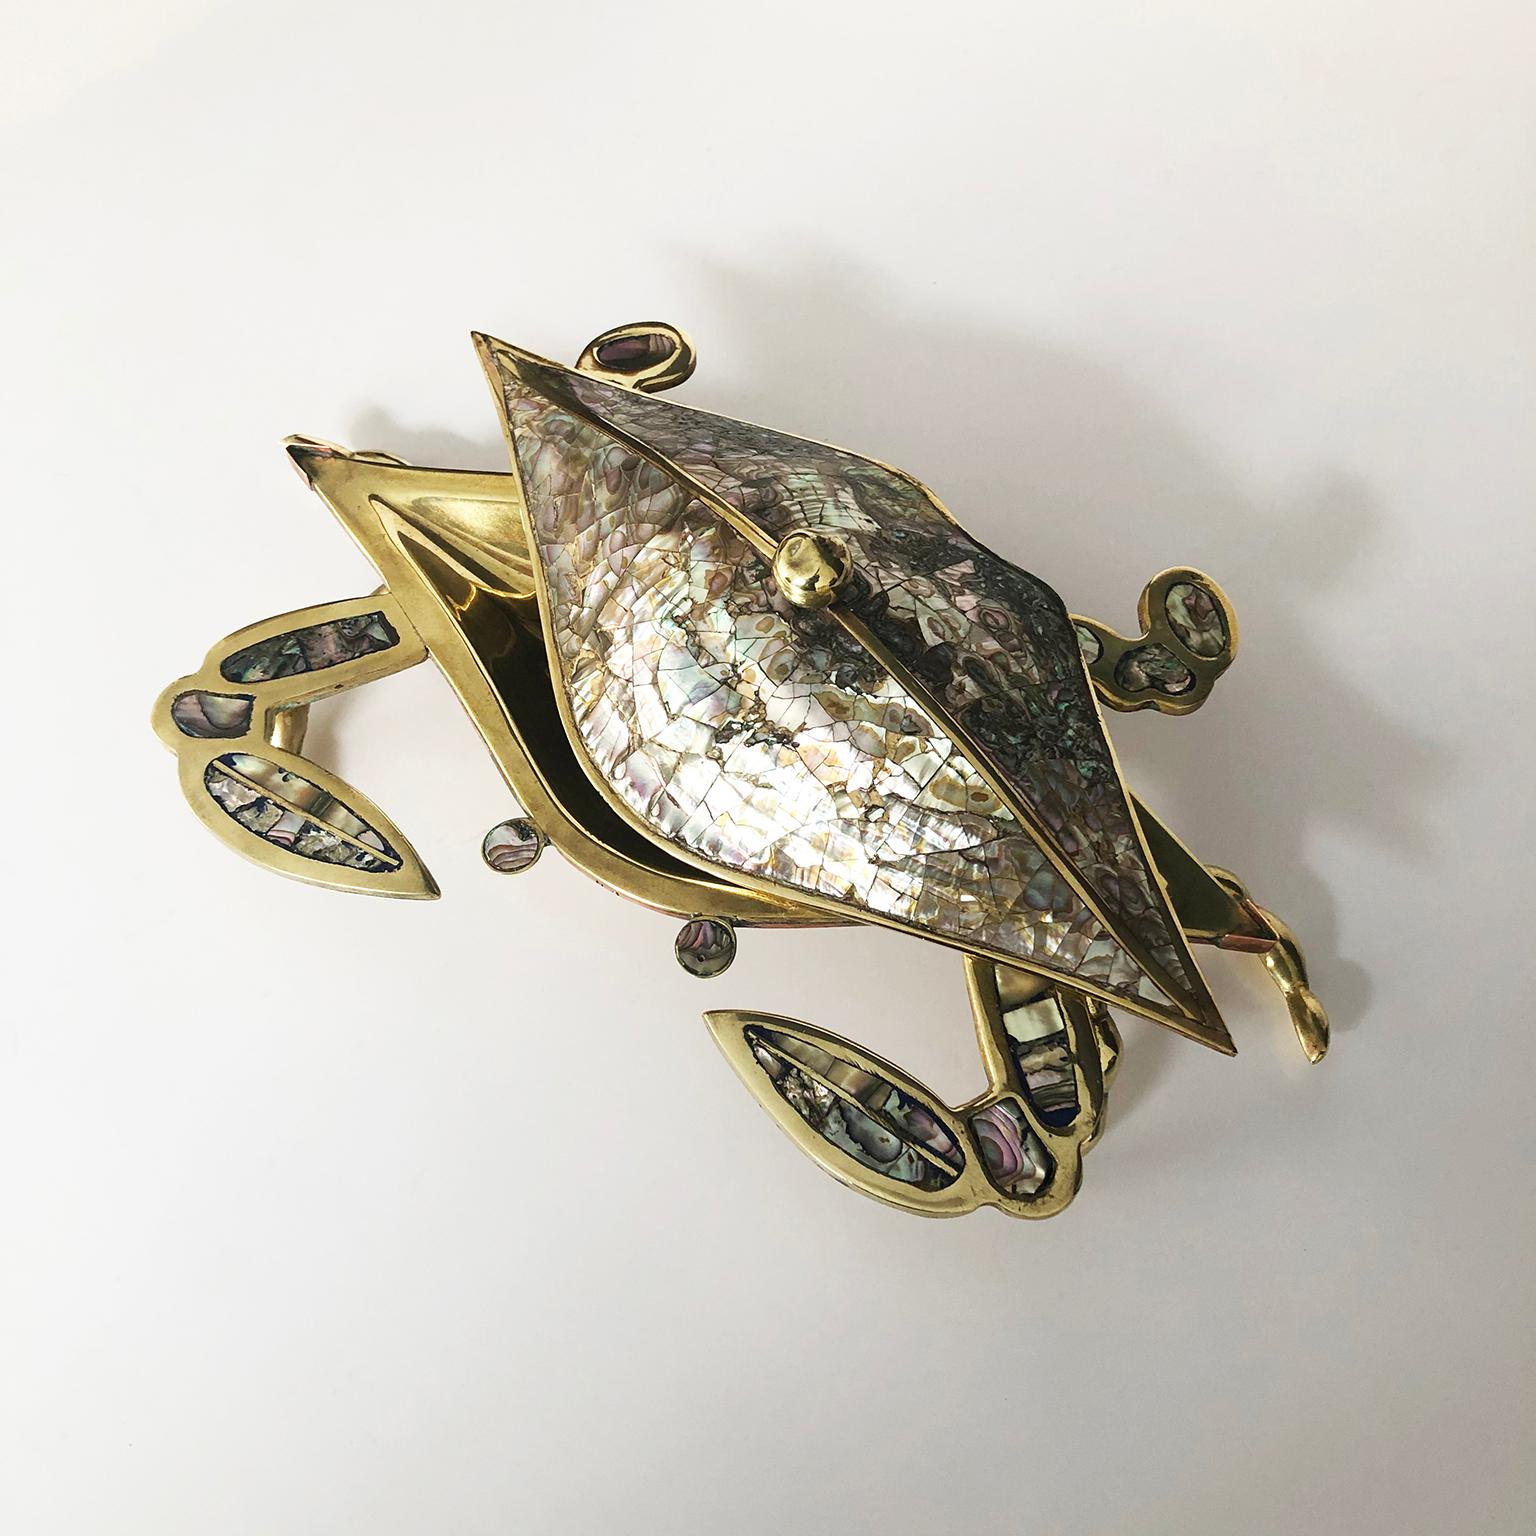 Circa 1950, We offer this Mexican brass and copper crab dish by Los Castillo. Excellent vintage conditions.